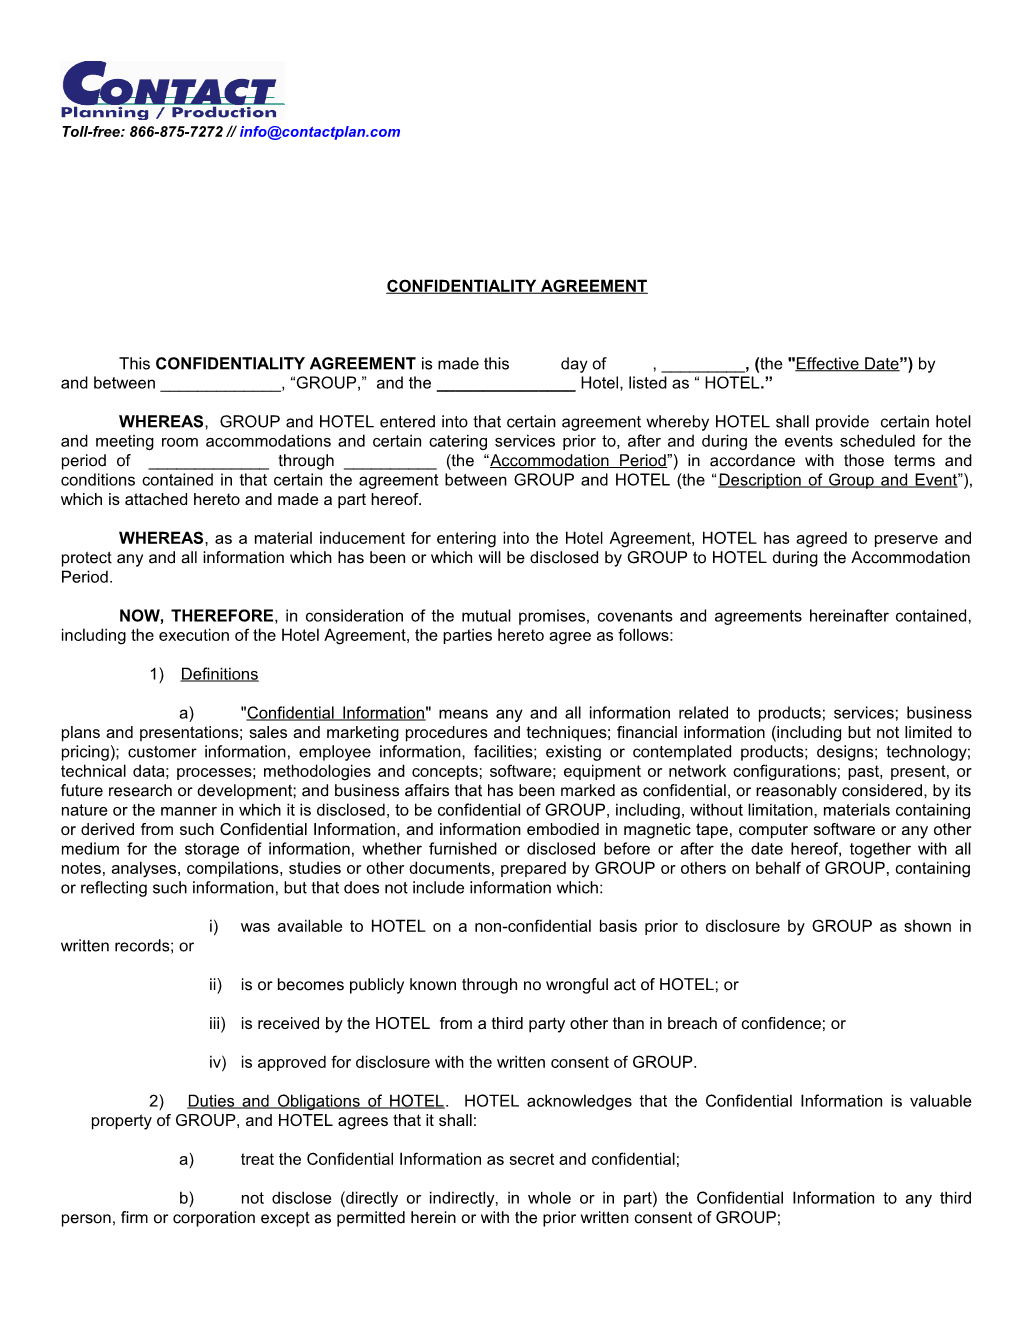 Confidentiality Agreement s1